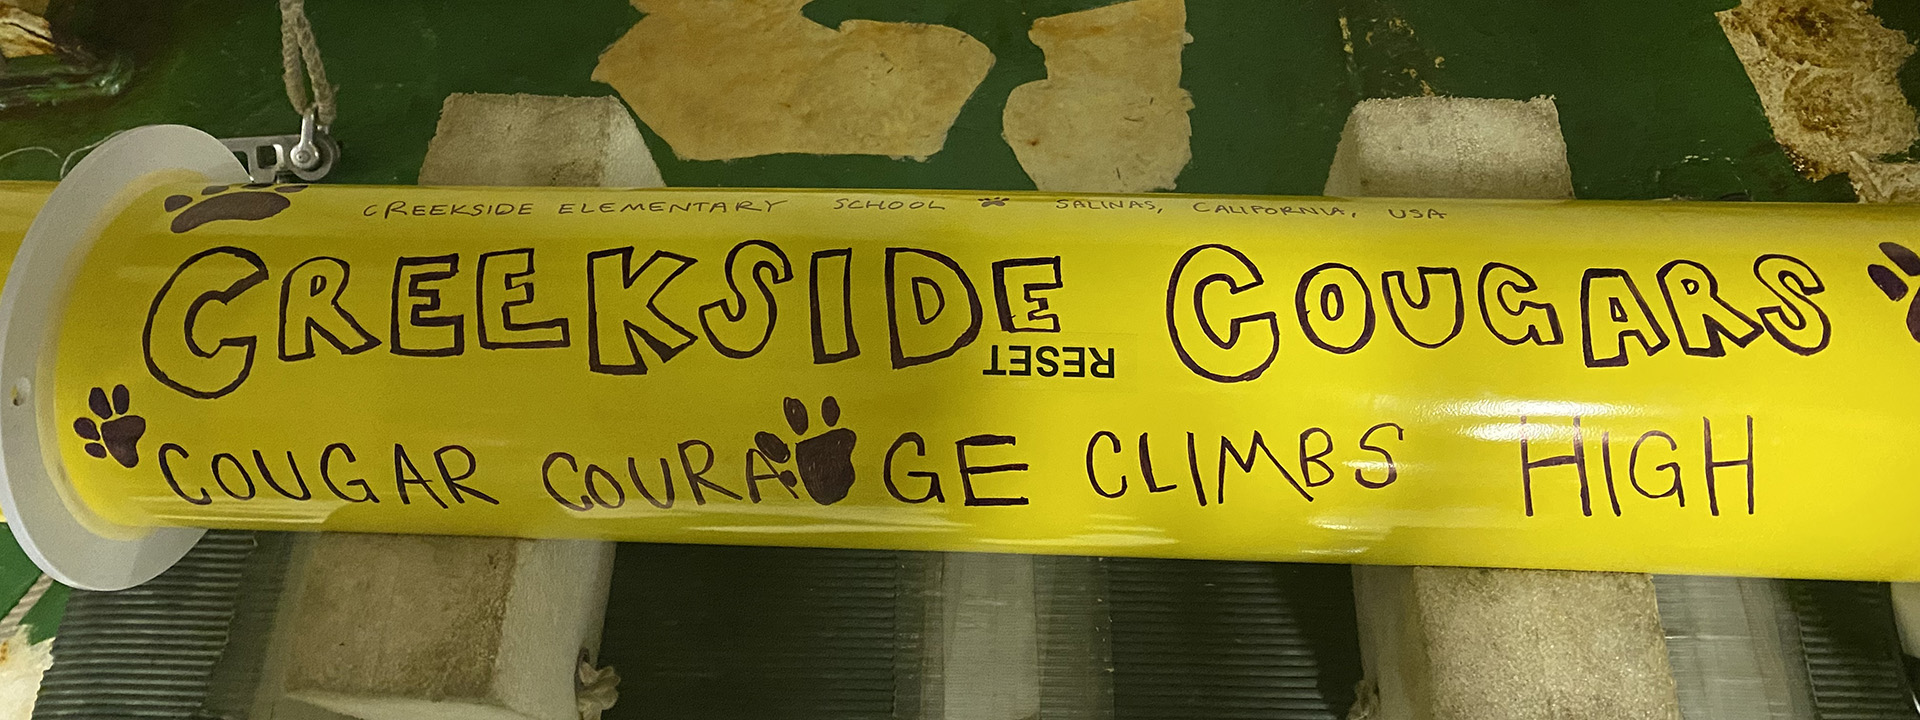 Cougar Courage Climbs High was adopted by Creekside Elementary School in Salinas, California and deployed at 32°N